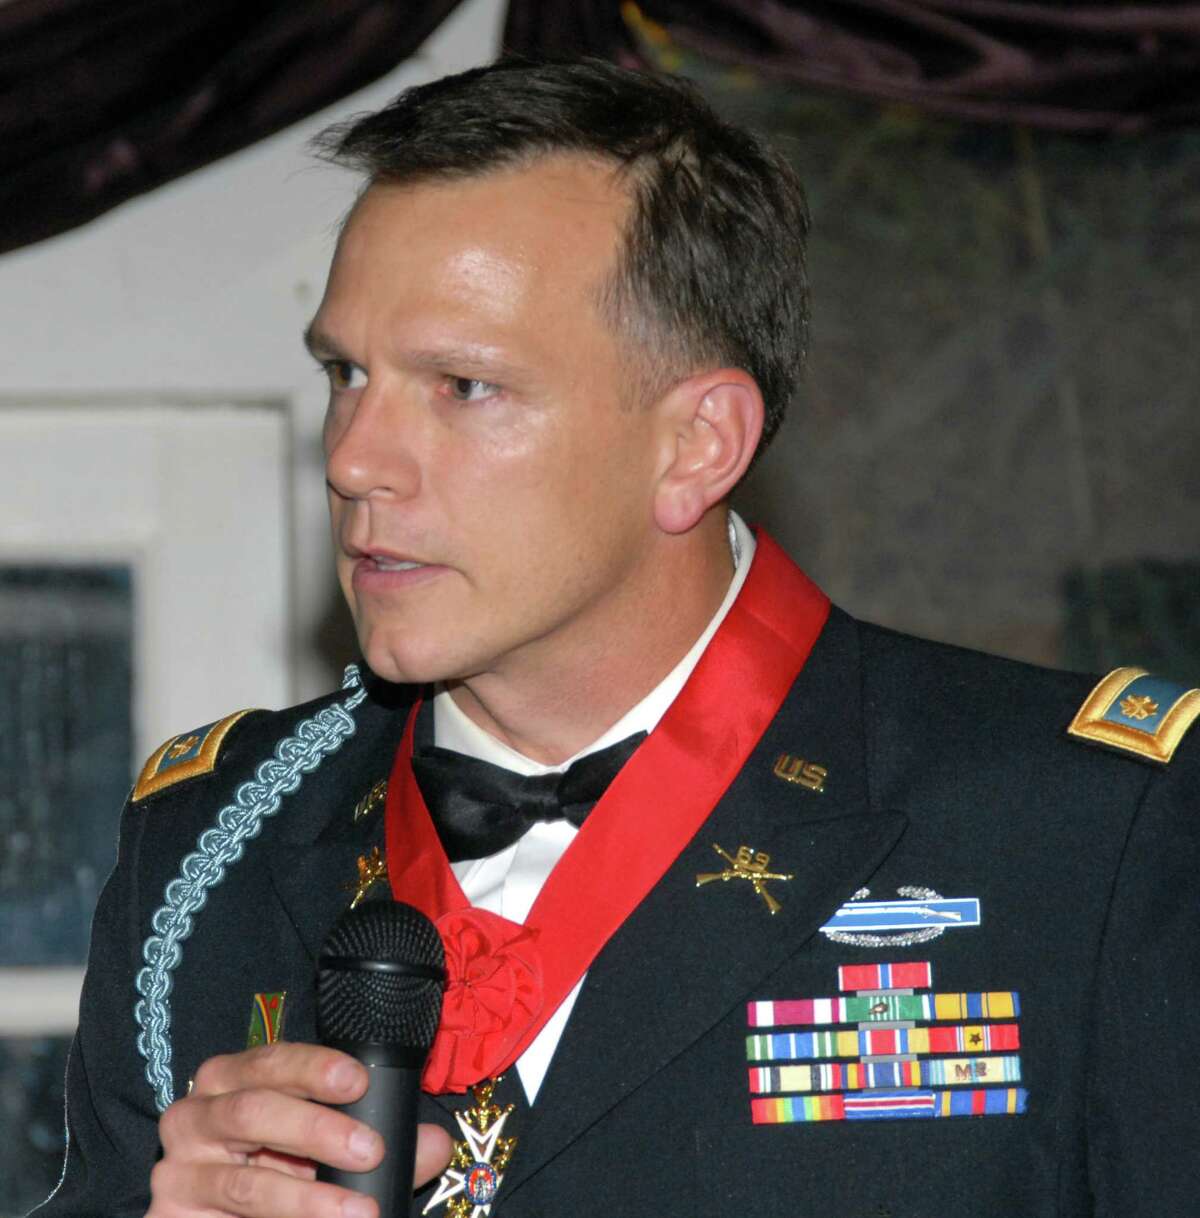 Major Sean Flynn, the new commander of the 1st Battalion 69thInfantry. (NY National Guard)